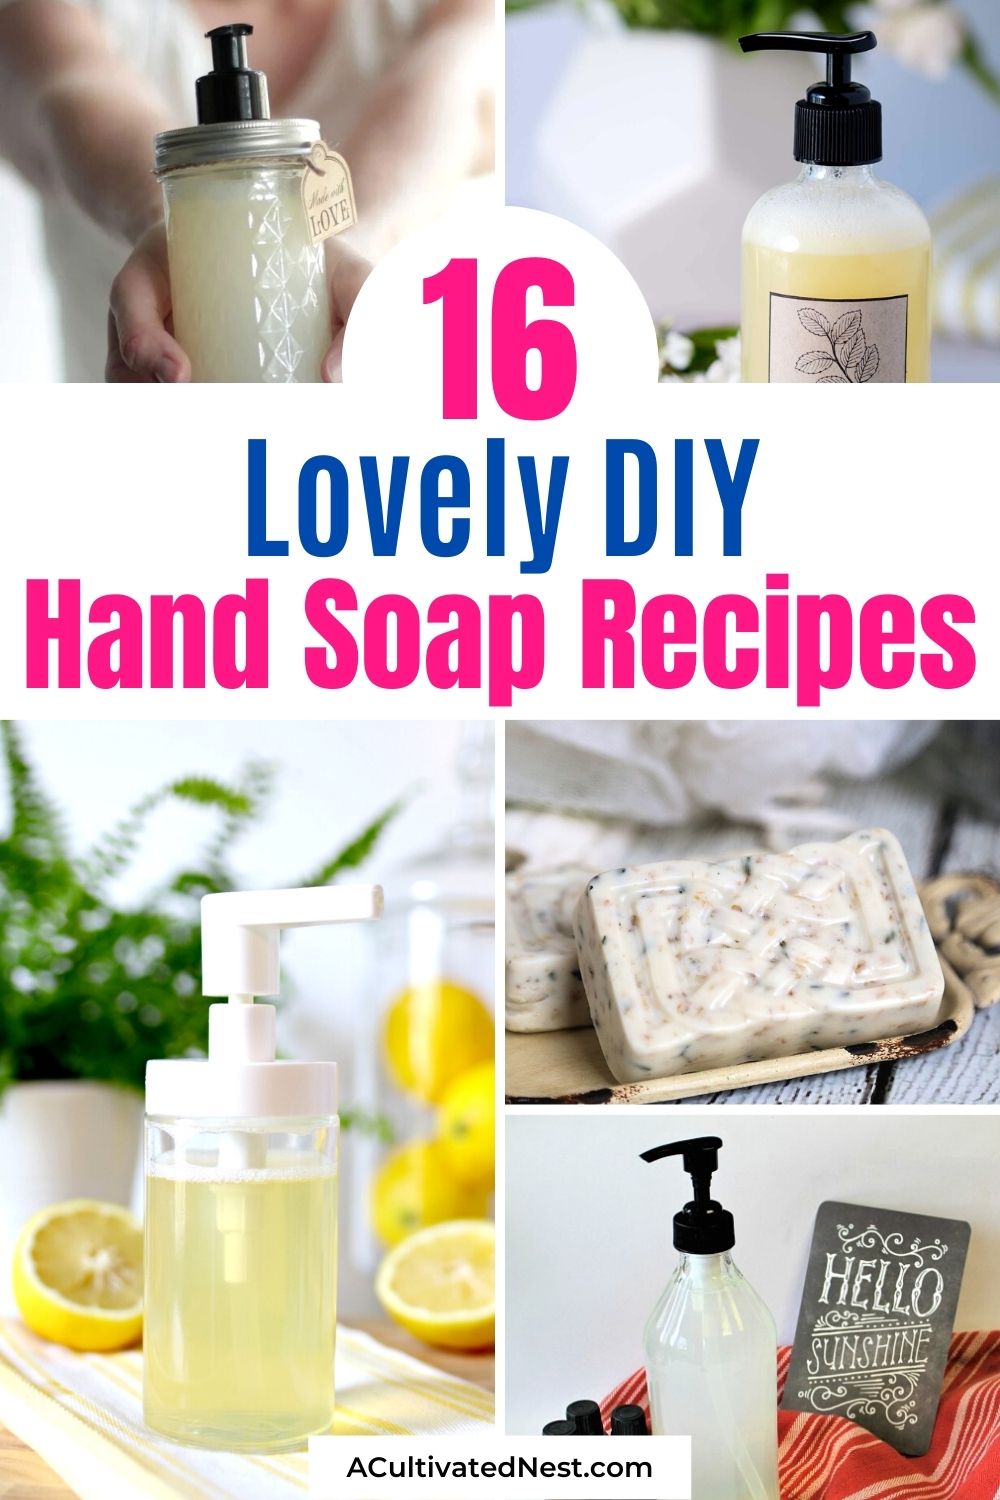 16 Lovely DIY Hand Soaps- Want some delightful-smelling all-natural hand soap without having to spend a lot? You can easily make your own at home! Here are 16 lovely DIY hand soaps to make! | #diys #diySoap #handmadeSoap #handSoap #ACultivatedNest